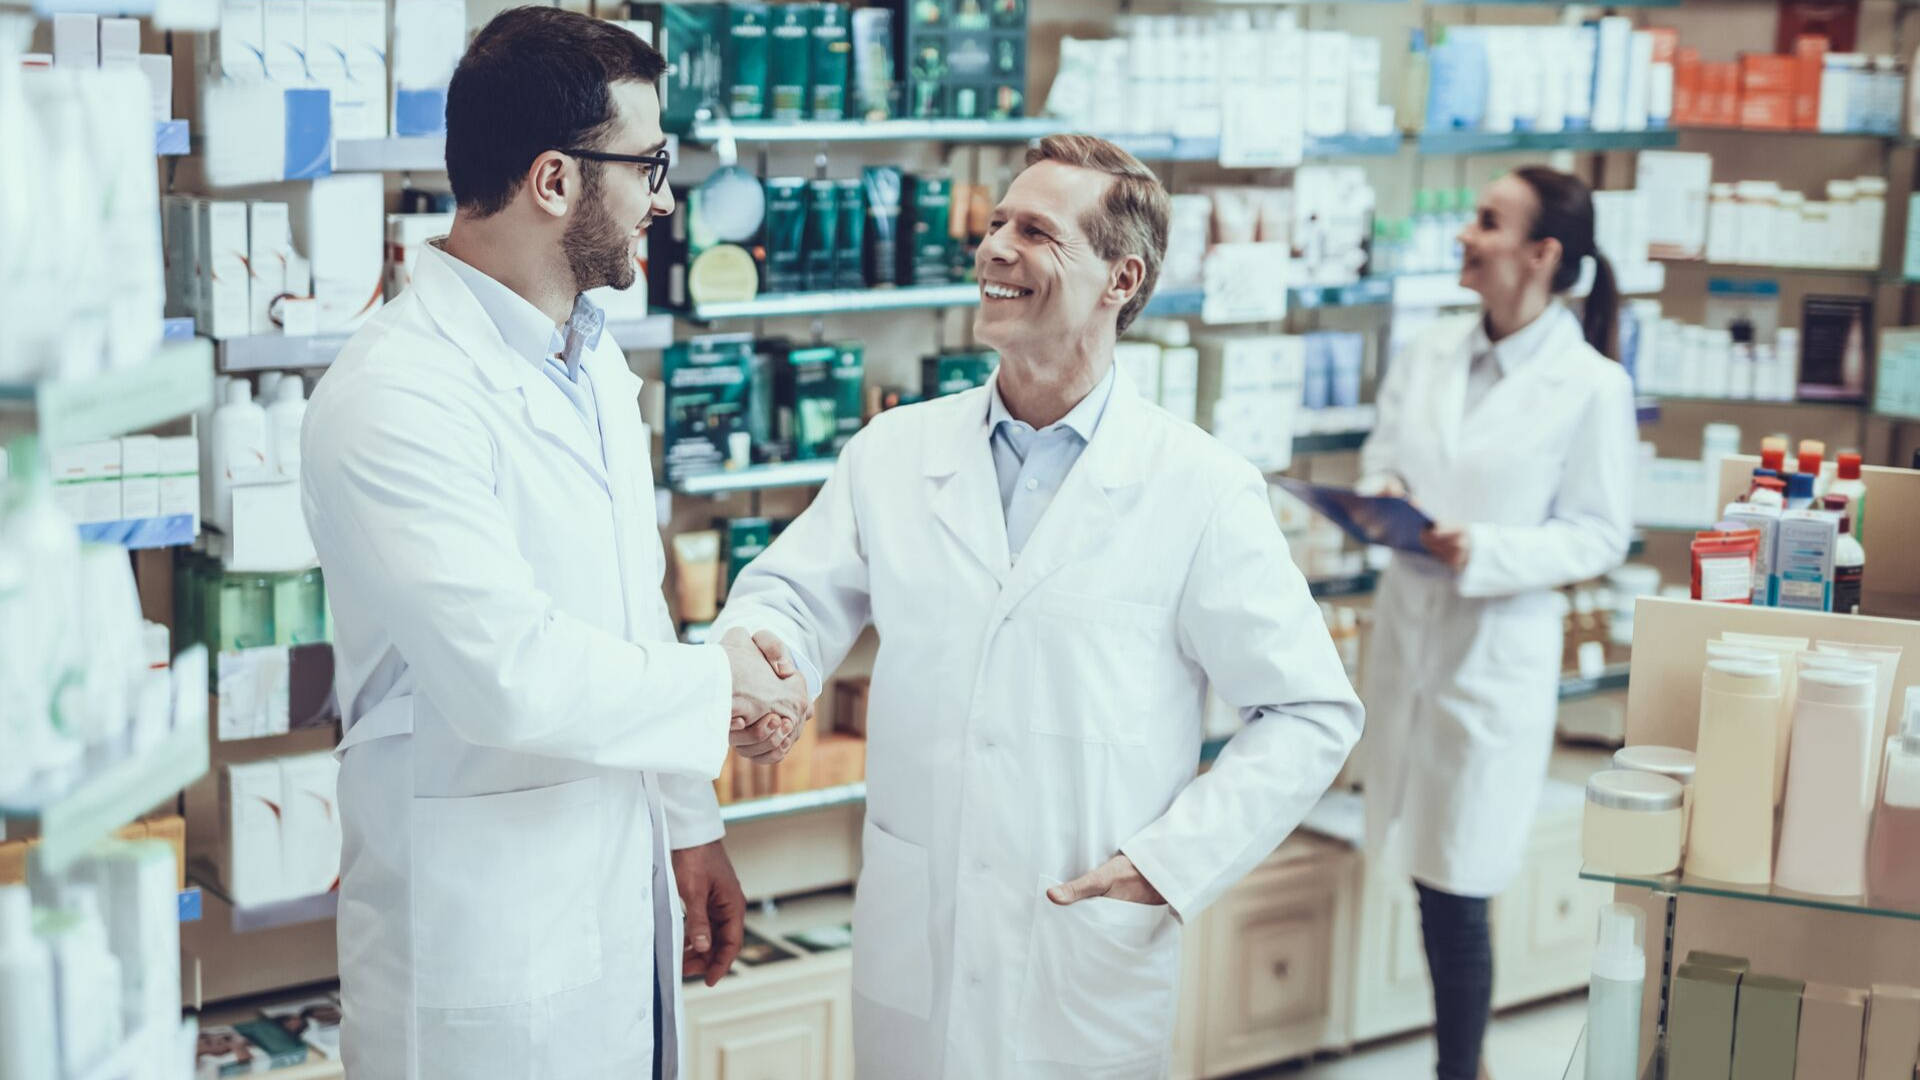 Pharmacists Forming A Professional Connection Through Handshake Background